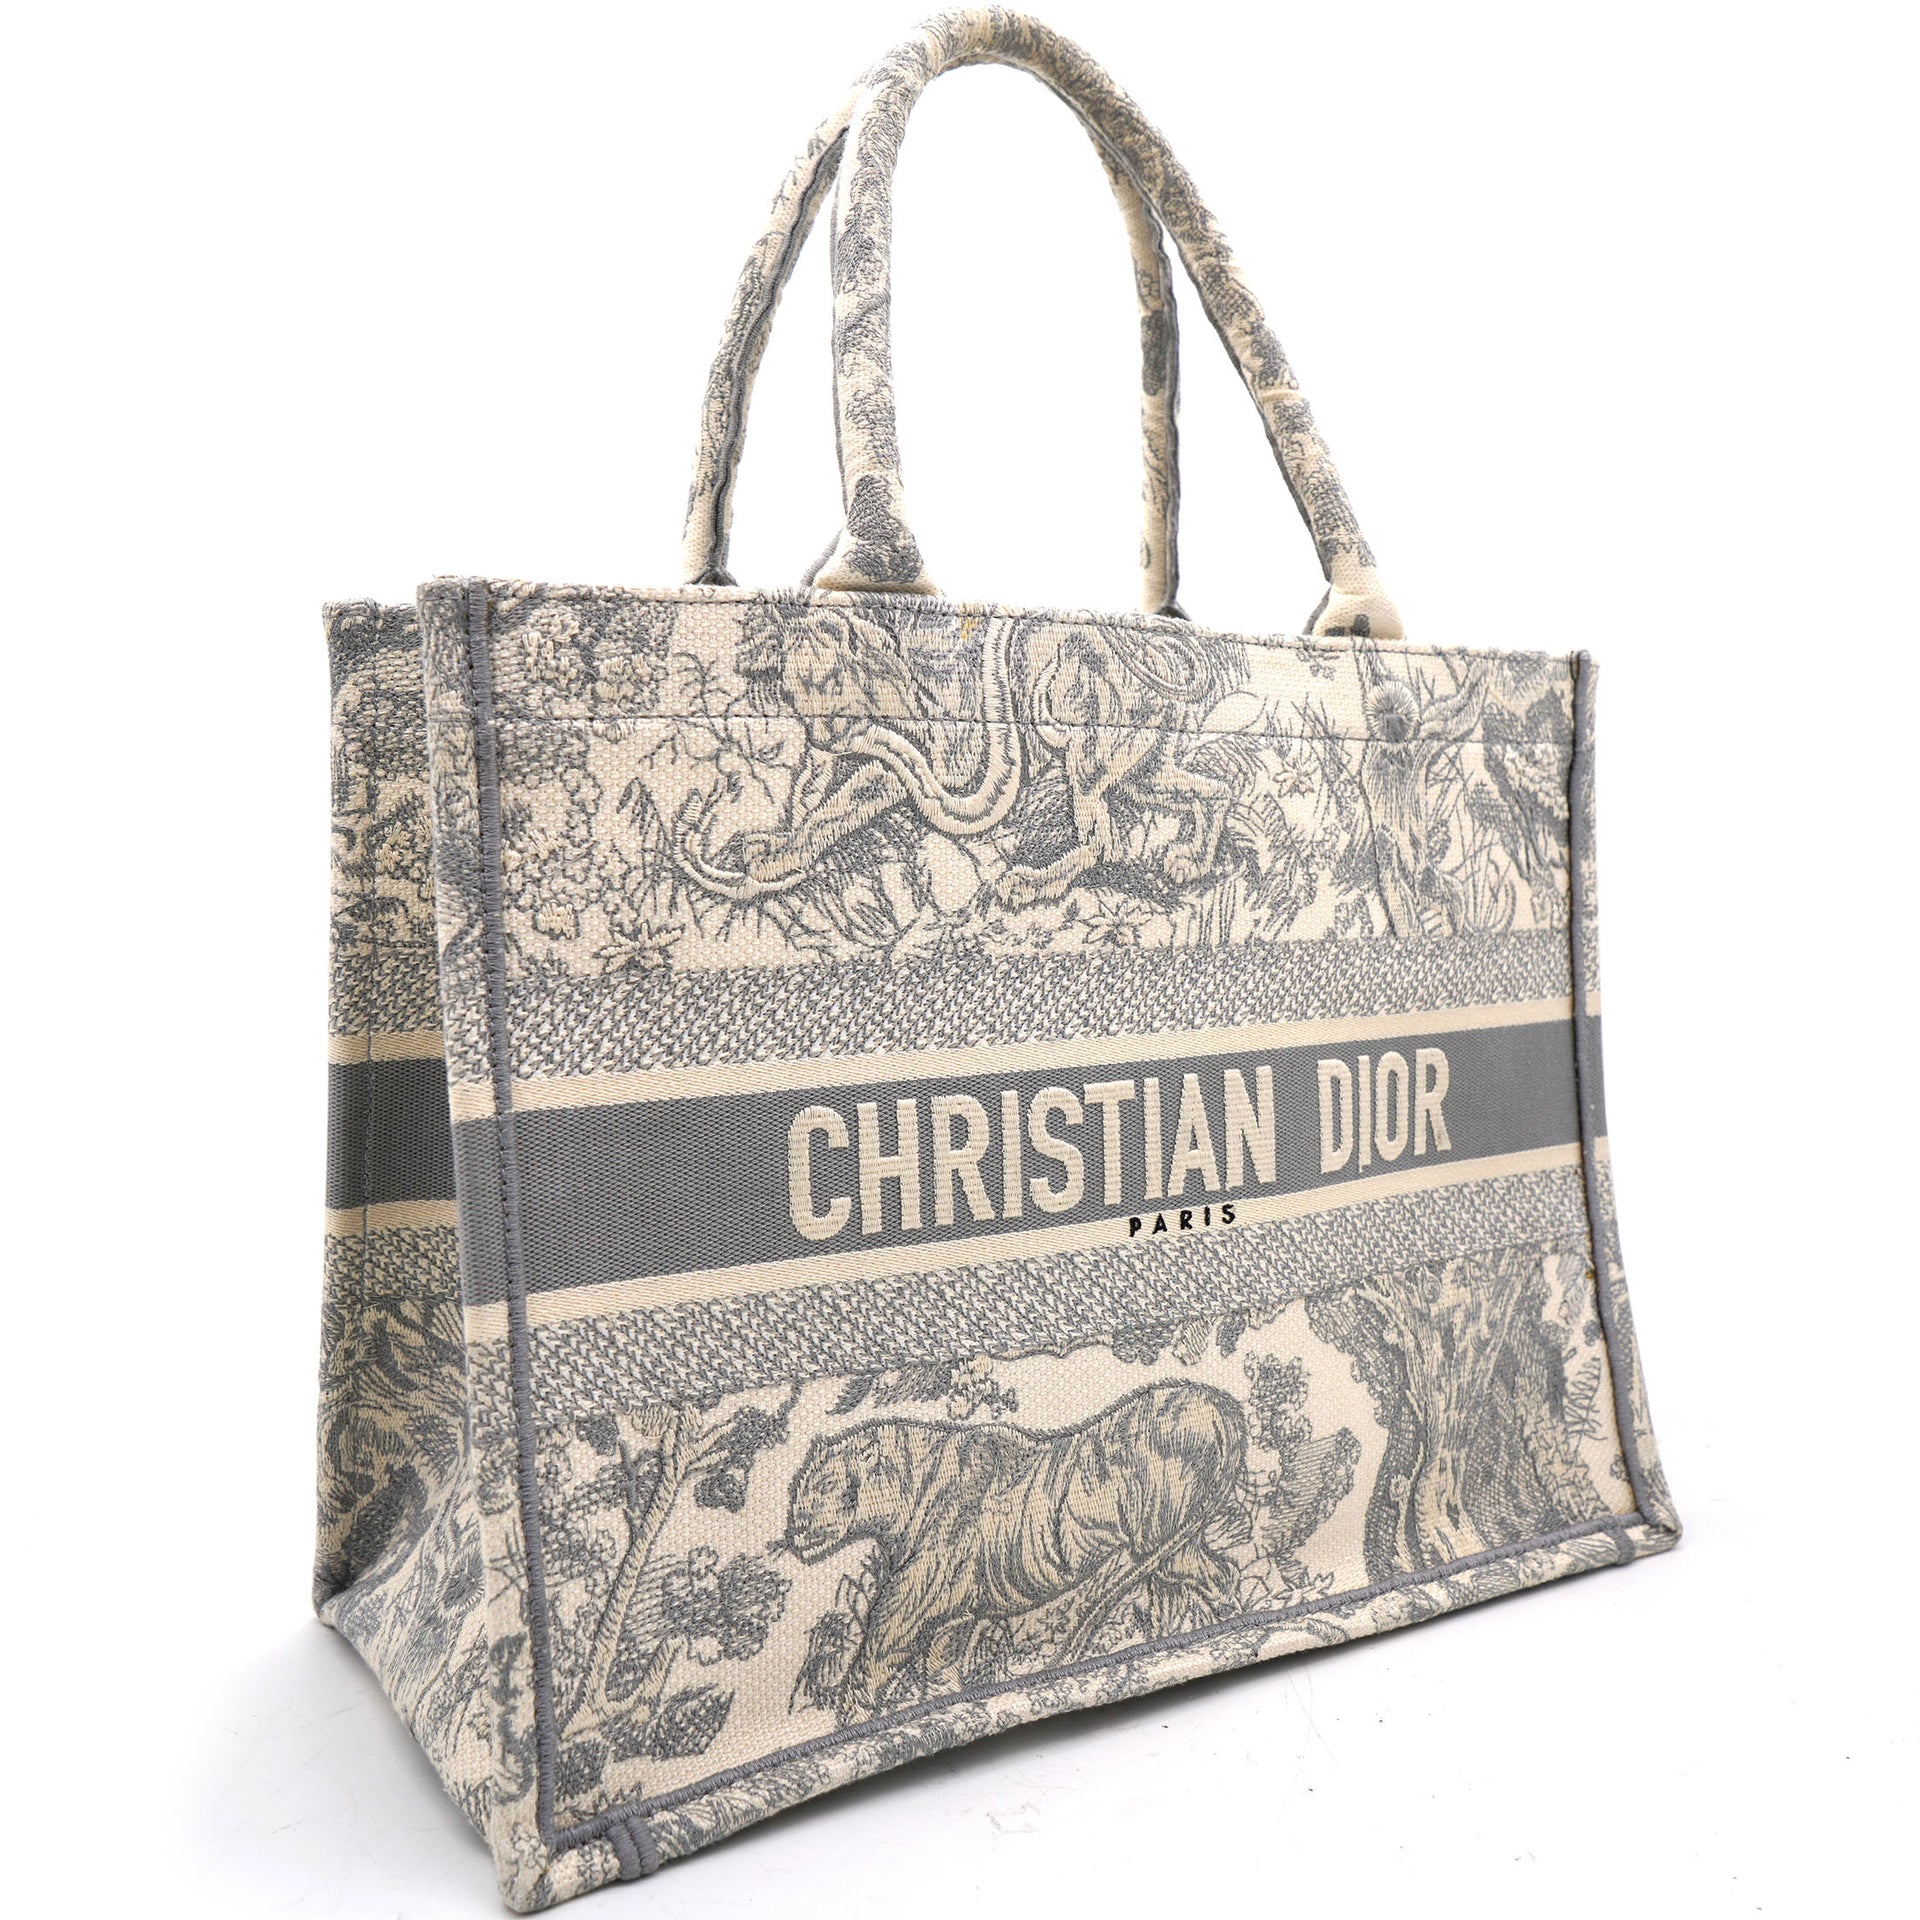 Authentic Second Hand Christian Dior Toile De Jouy Book Tote  PSSG2200002  THE FIFTH COLLECTION